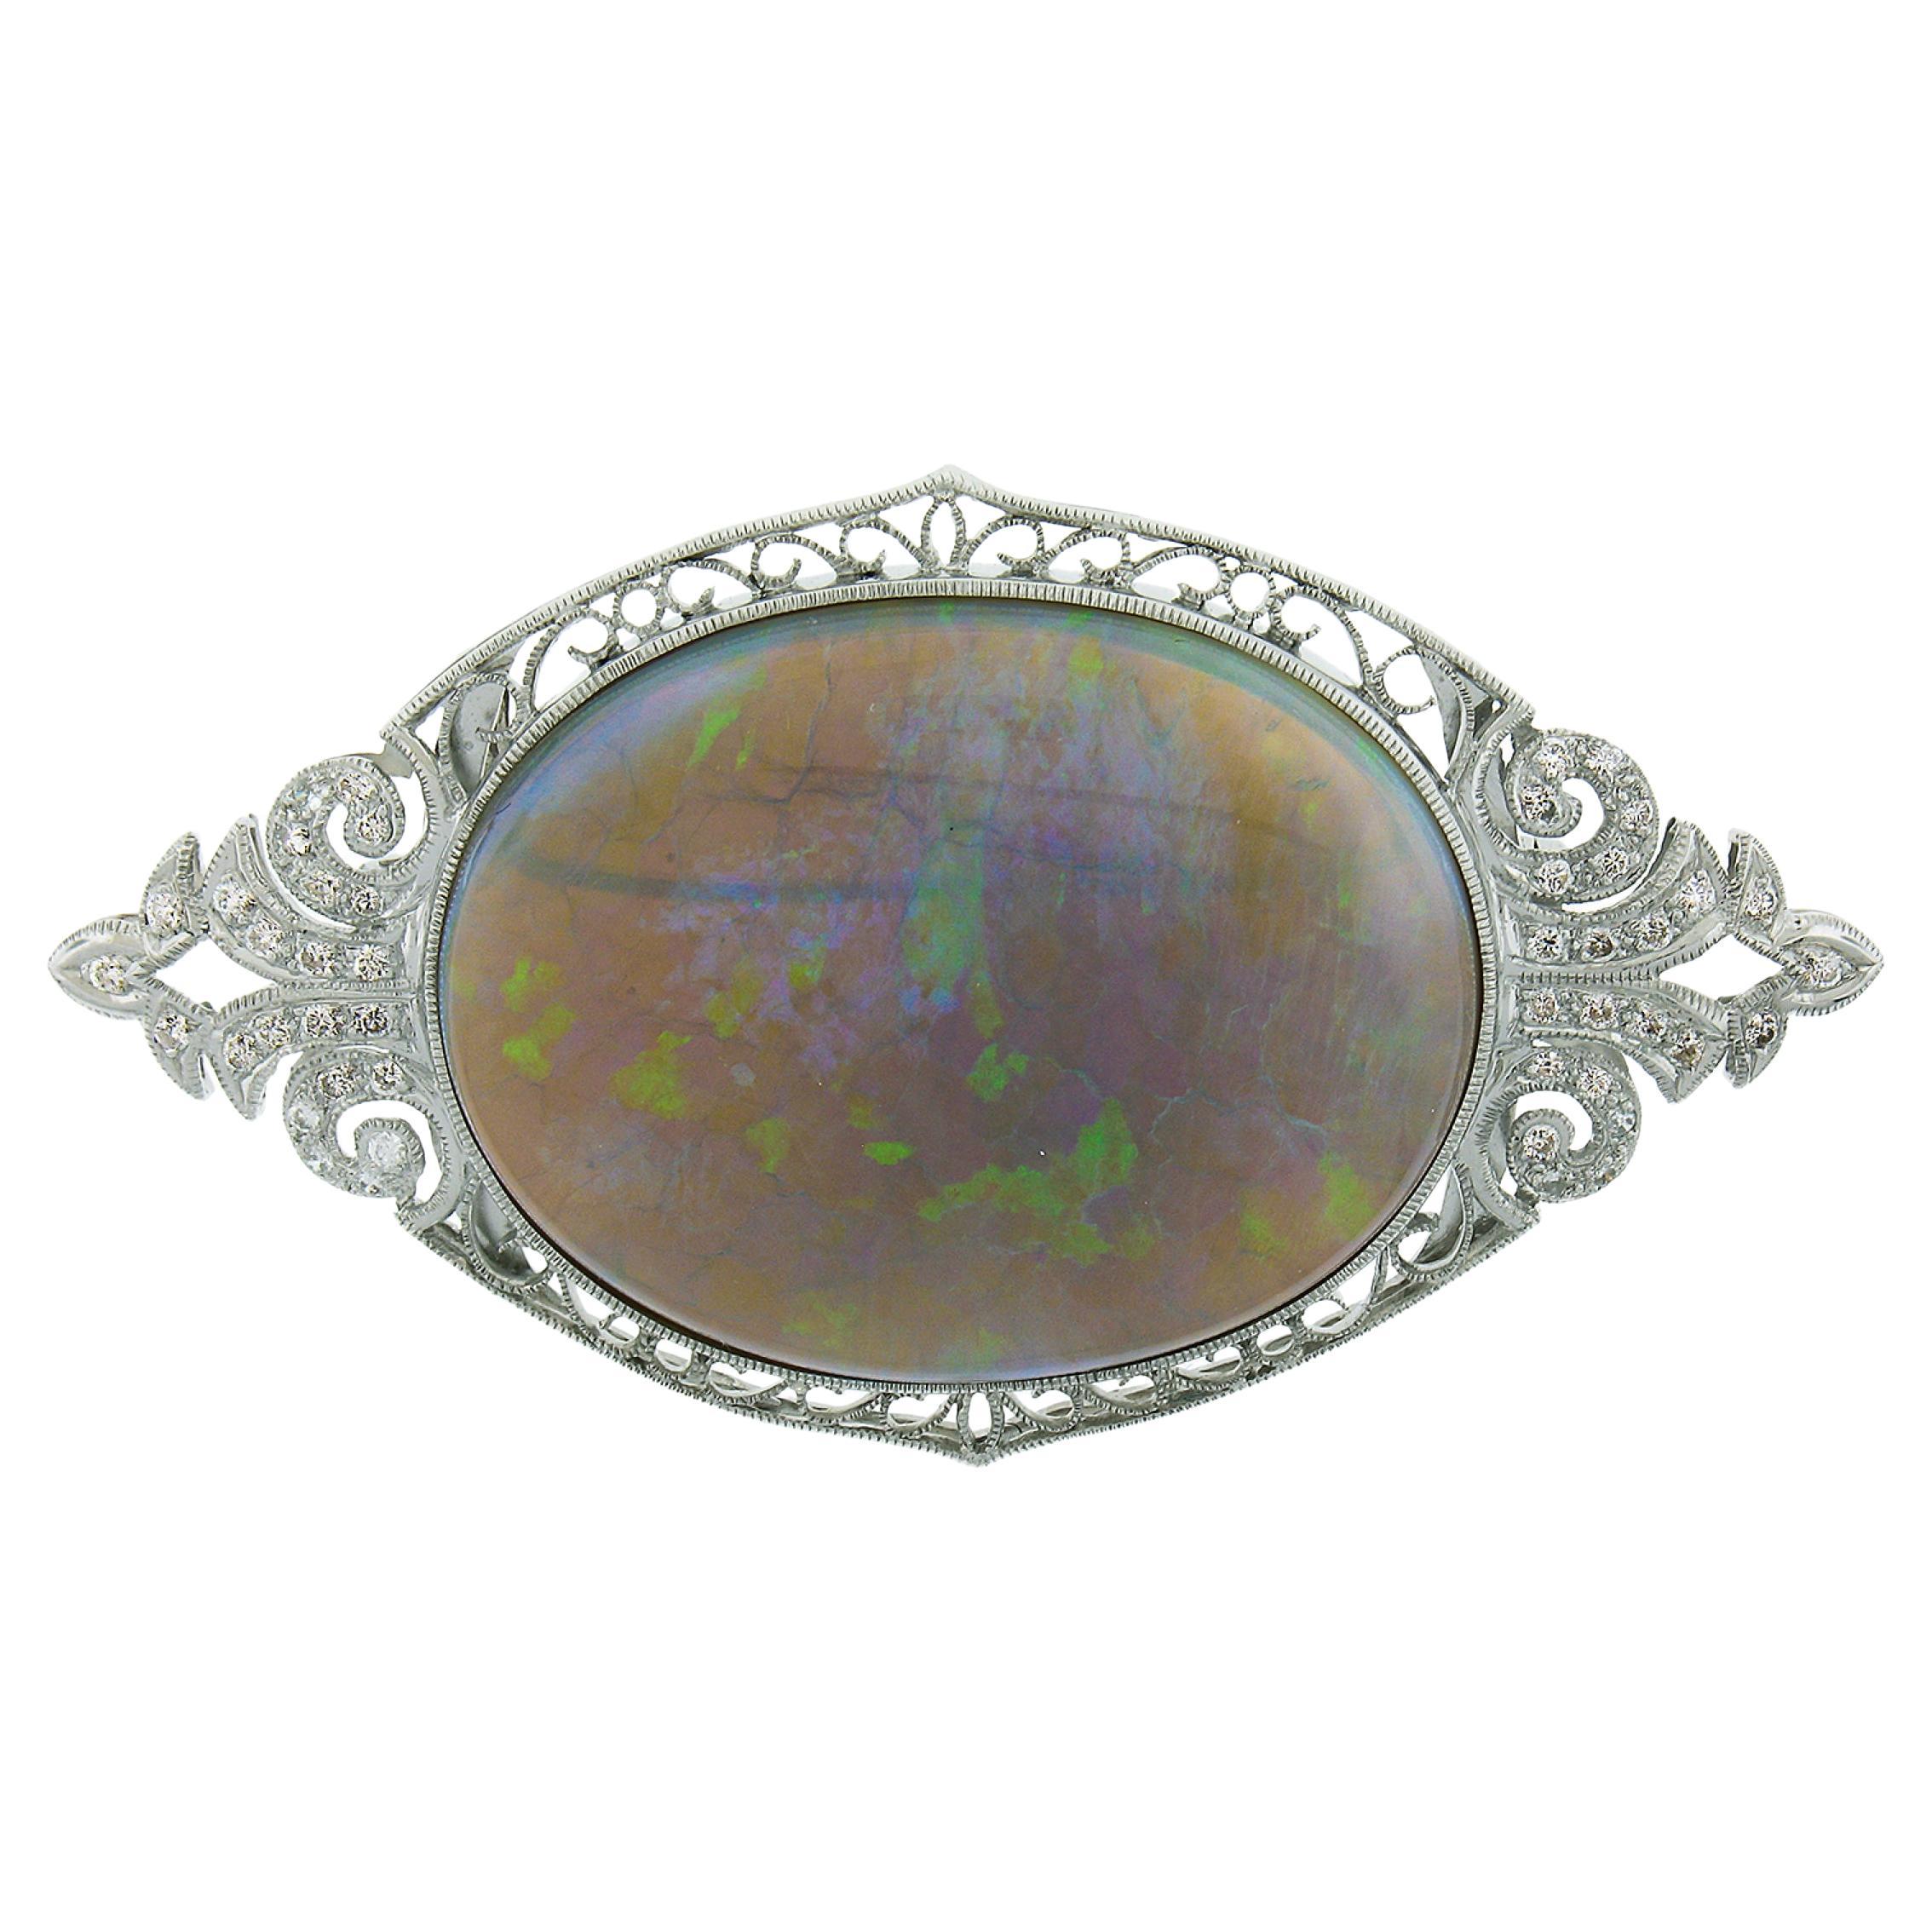 Vintage 18k Gold 61.40ctw GIA Oval Cabochon Opal & Diamond Pin Brooch Pendant For Sale